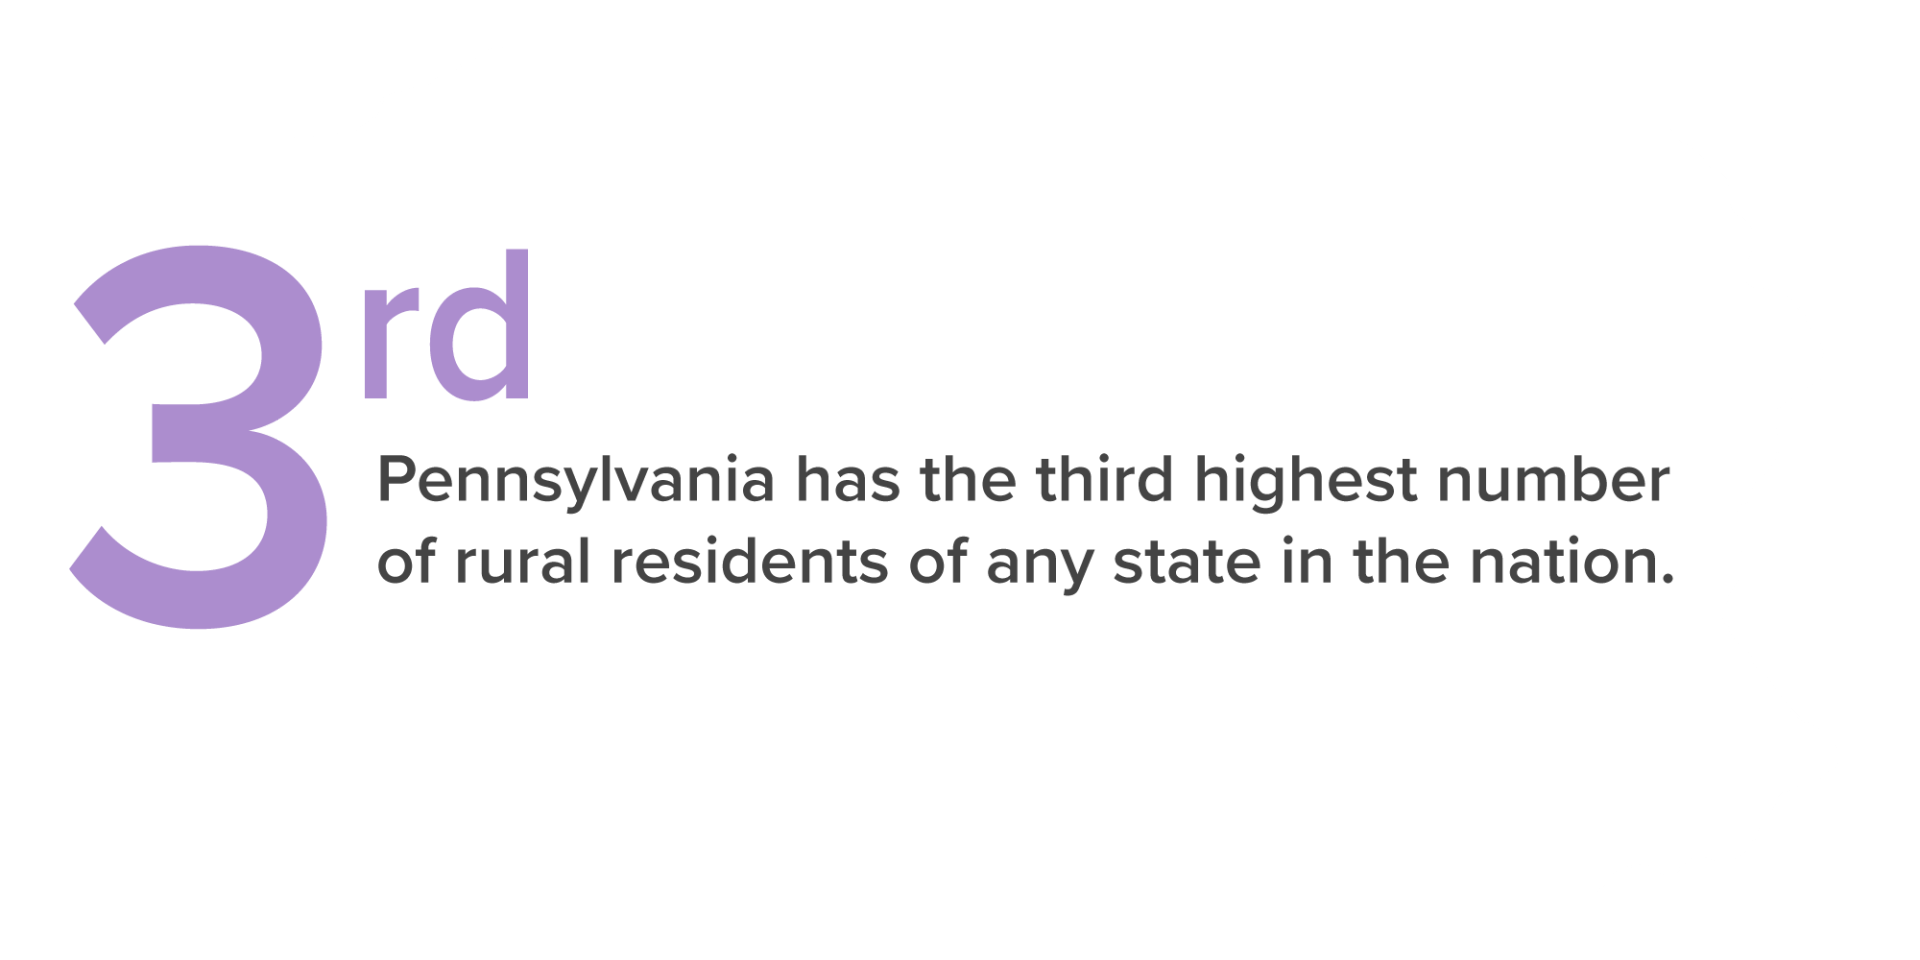 Pennsylvania has the third highest number<br />
of rural residents of any state in the nation.